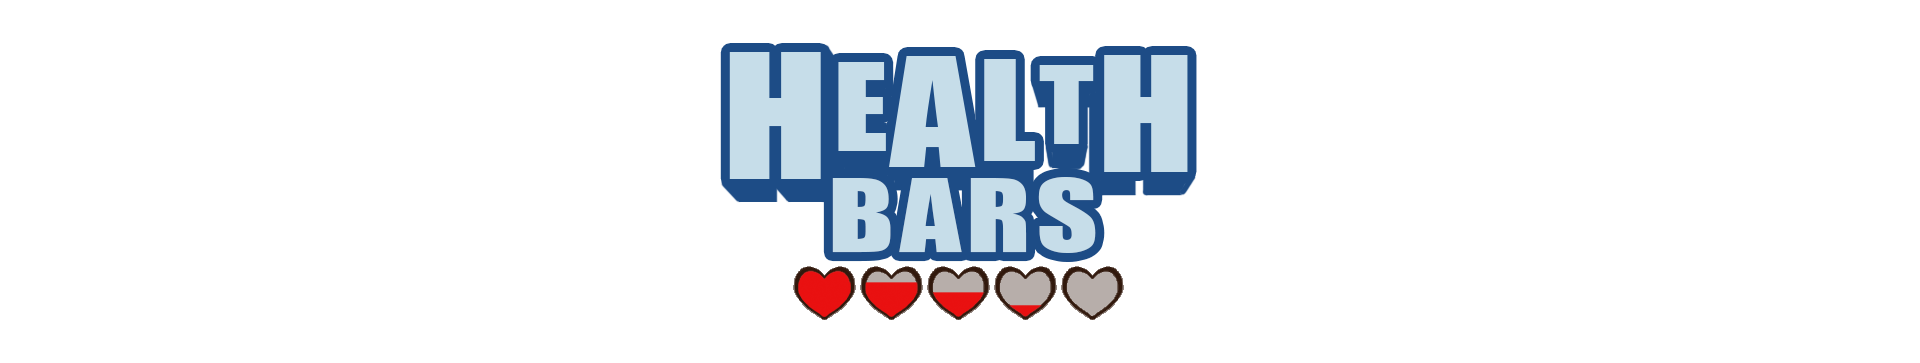 Health and Points Bars